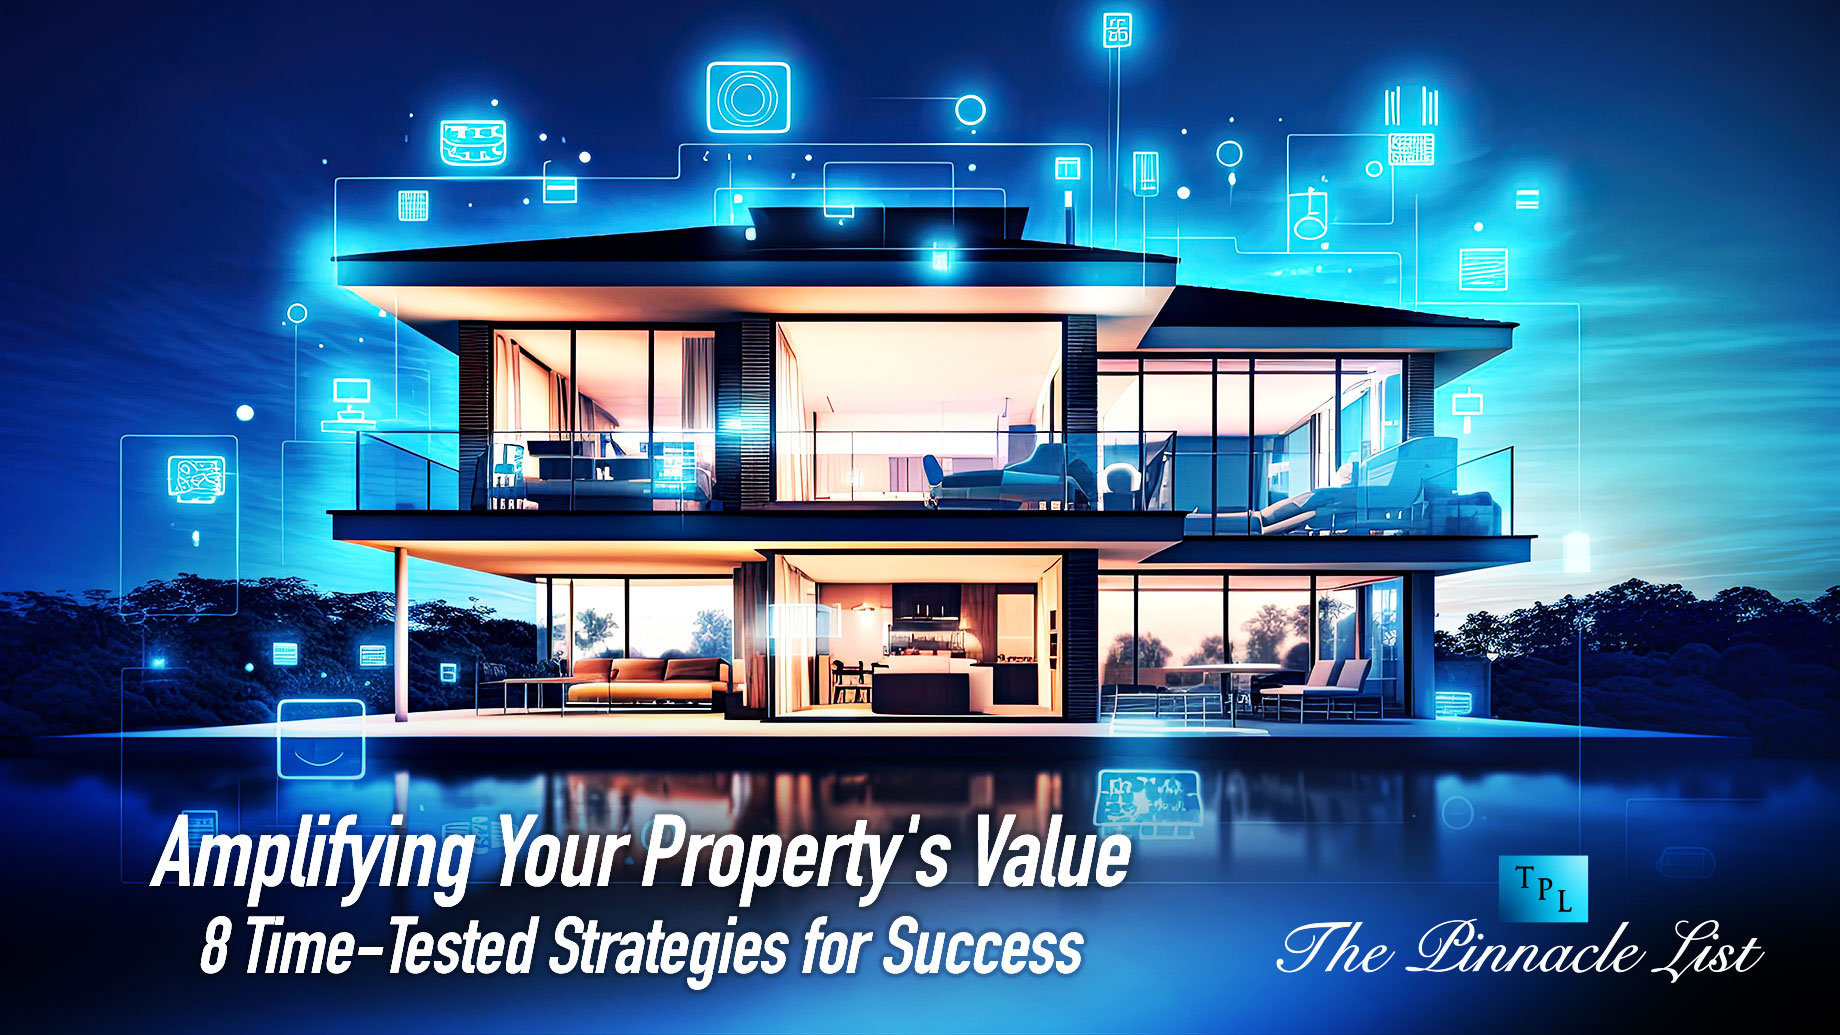 Amplifying Your Property's Value: 8 Time-Tested Strategies for Success